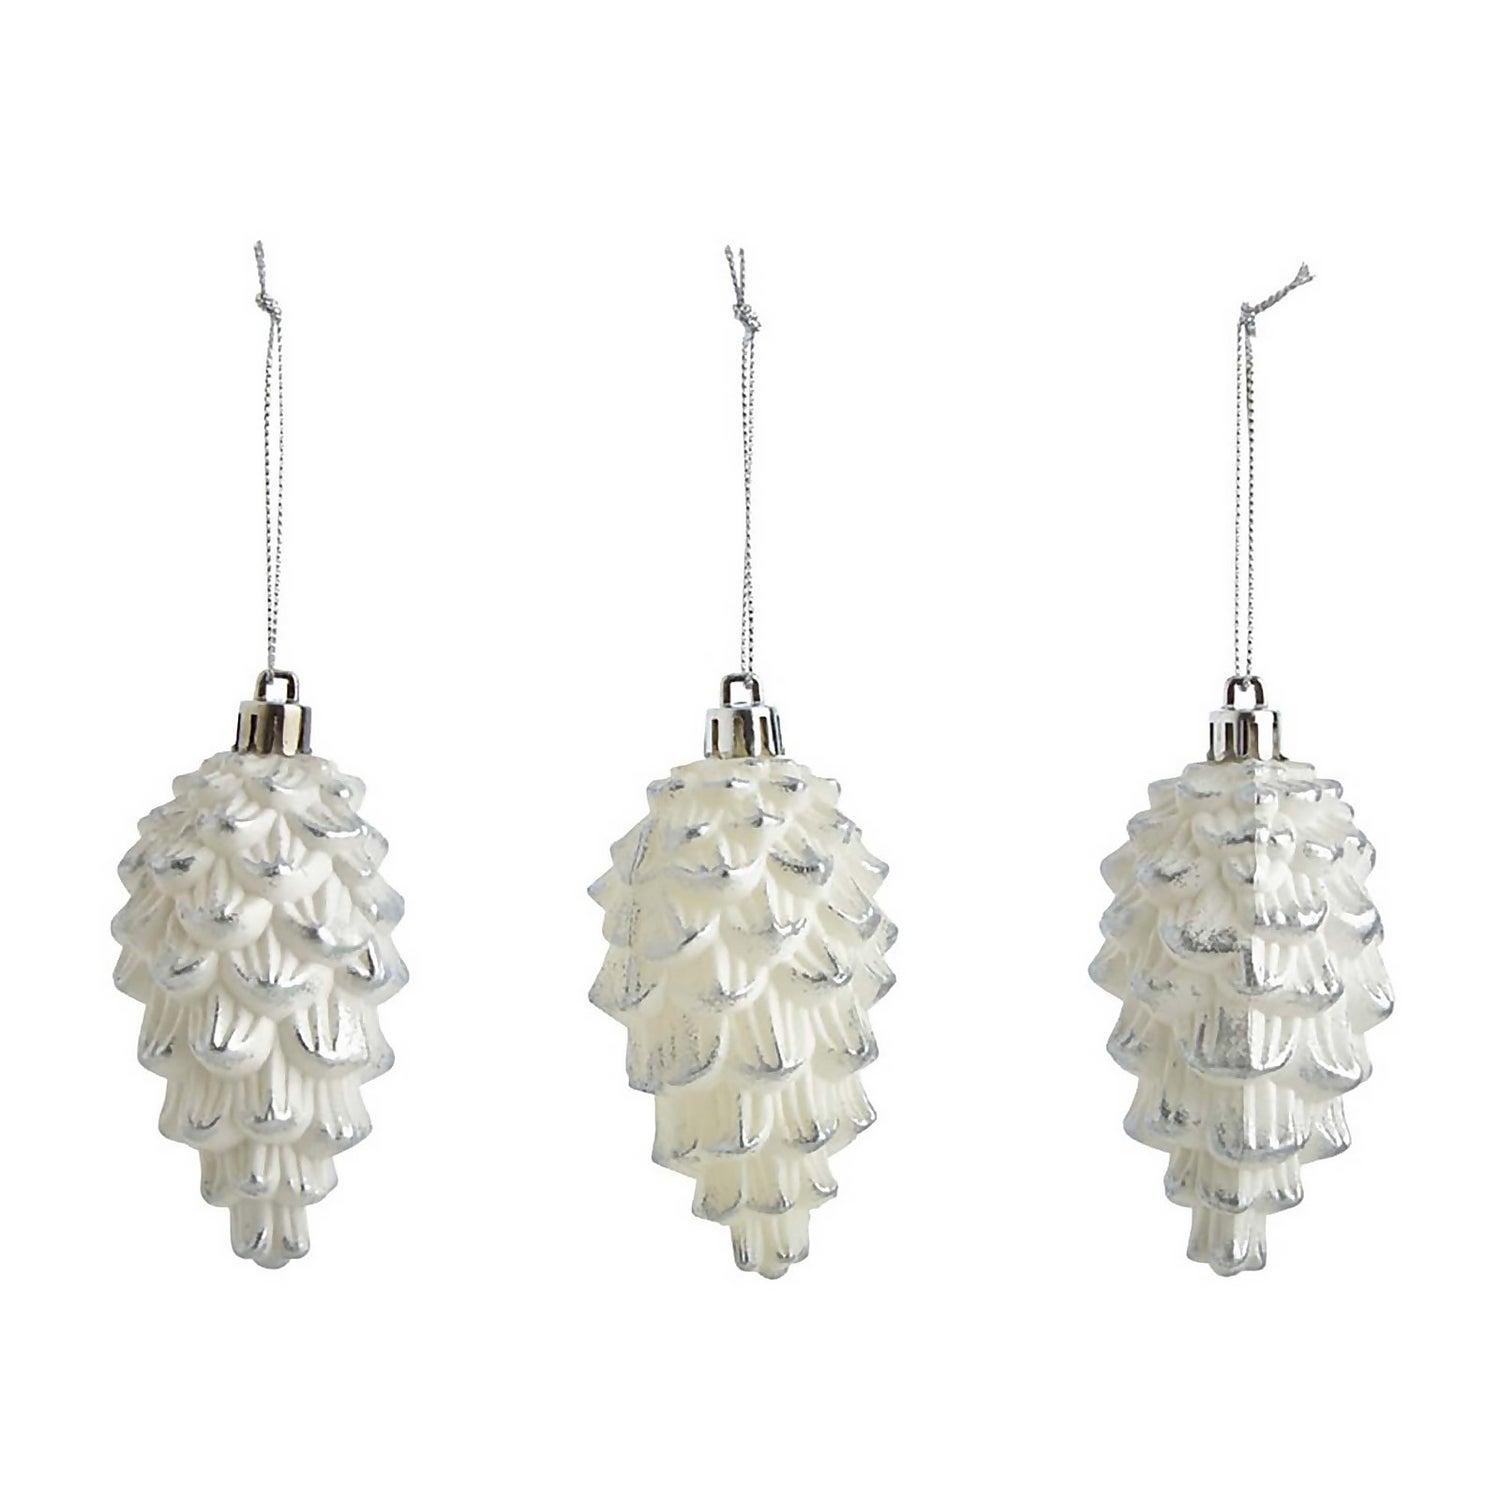 White Pinecones Hanging Christmas Tree Decorations - Pack of 6 | Homebase